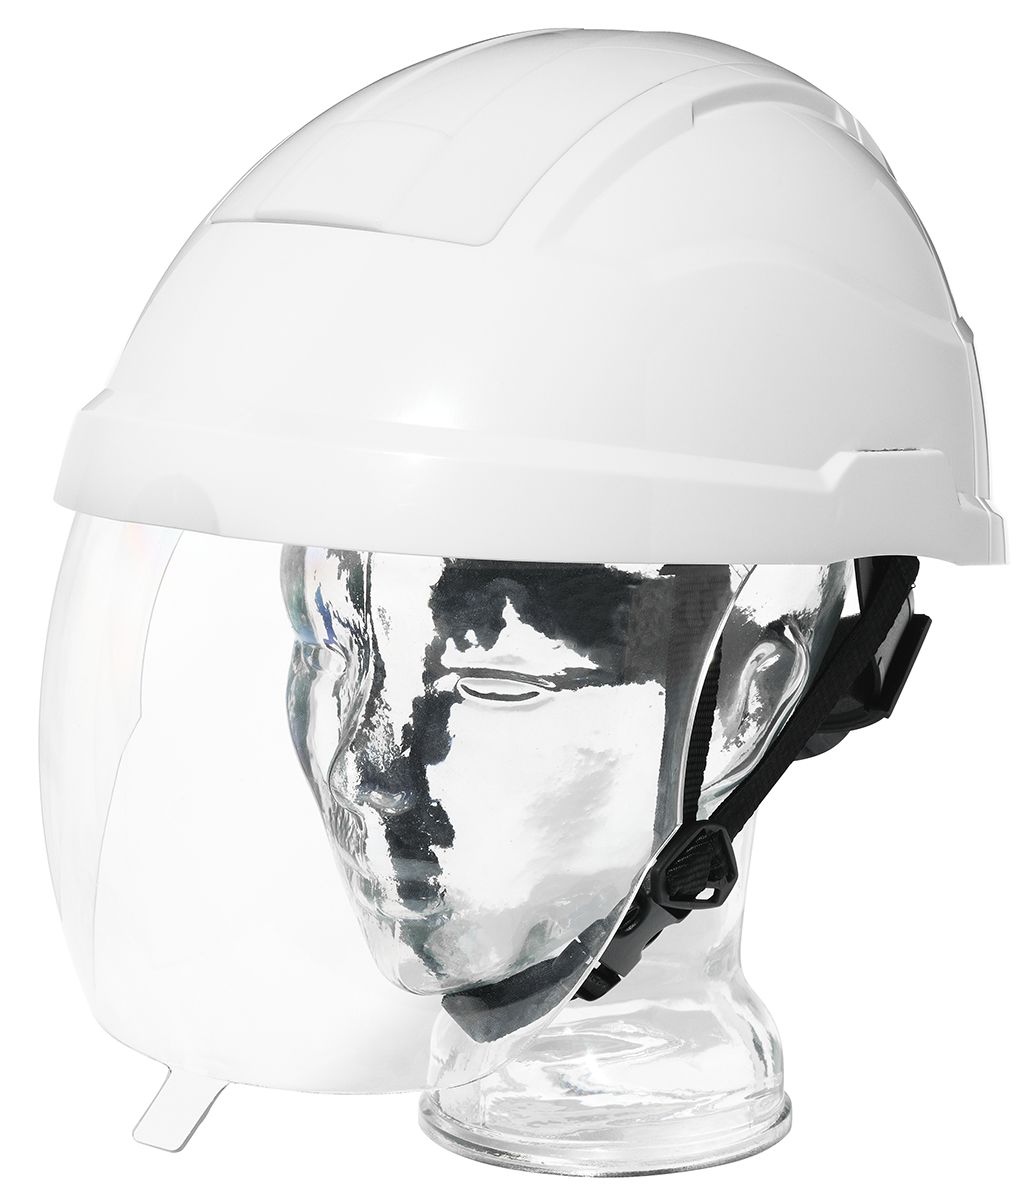 Sibille White Electrician Helmet with Chin Strap